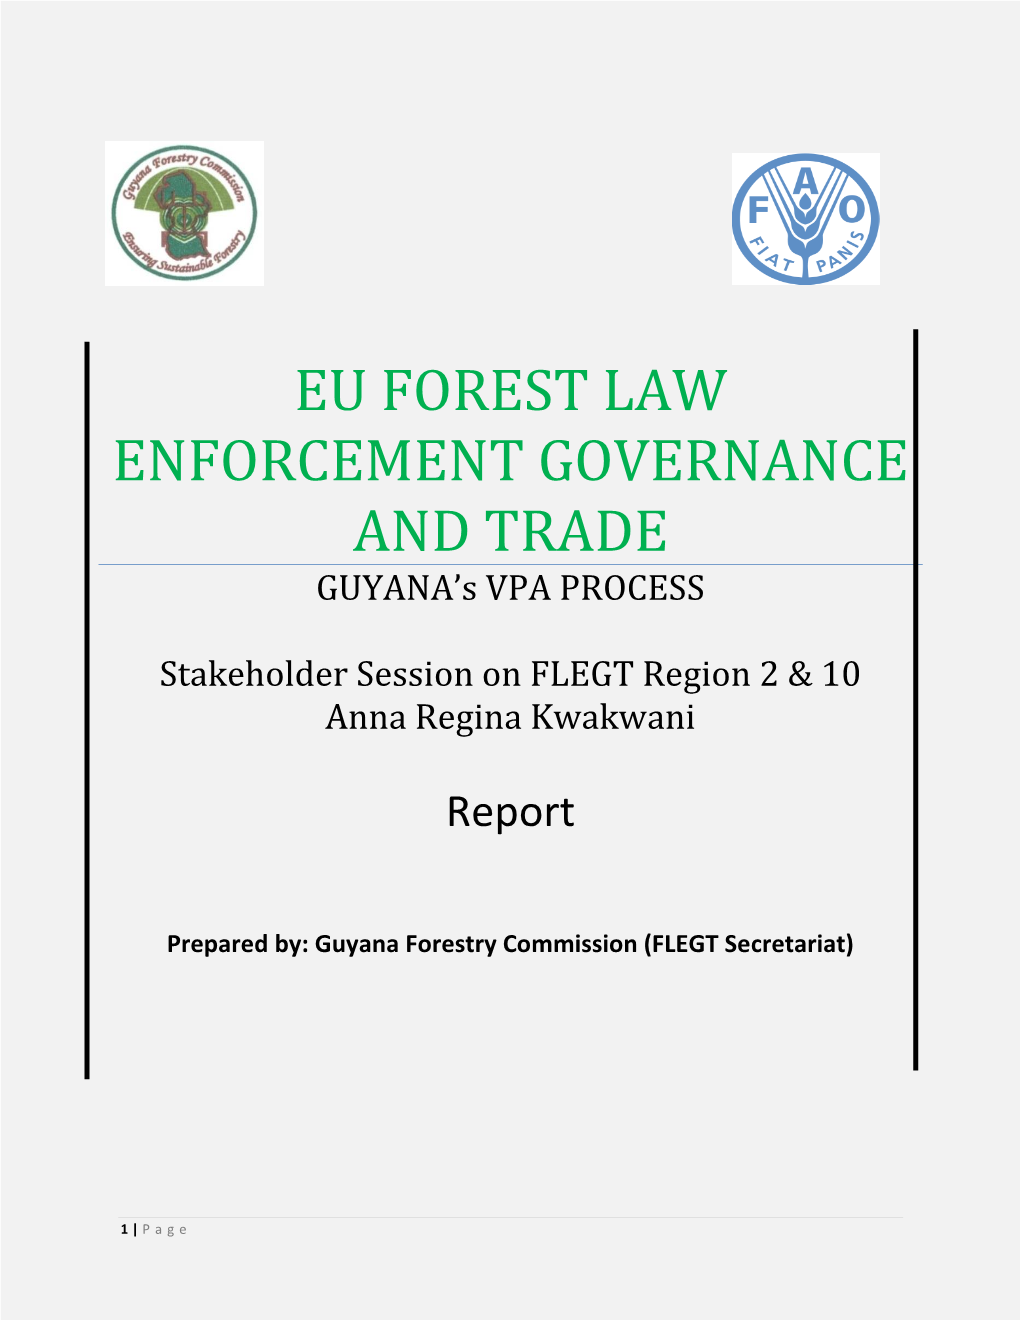 EU FOREST LAW ENFORCEMENT GOVERNANCE and TRADE GUYANA’S VPA PROCESS